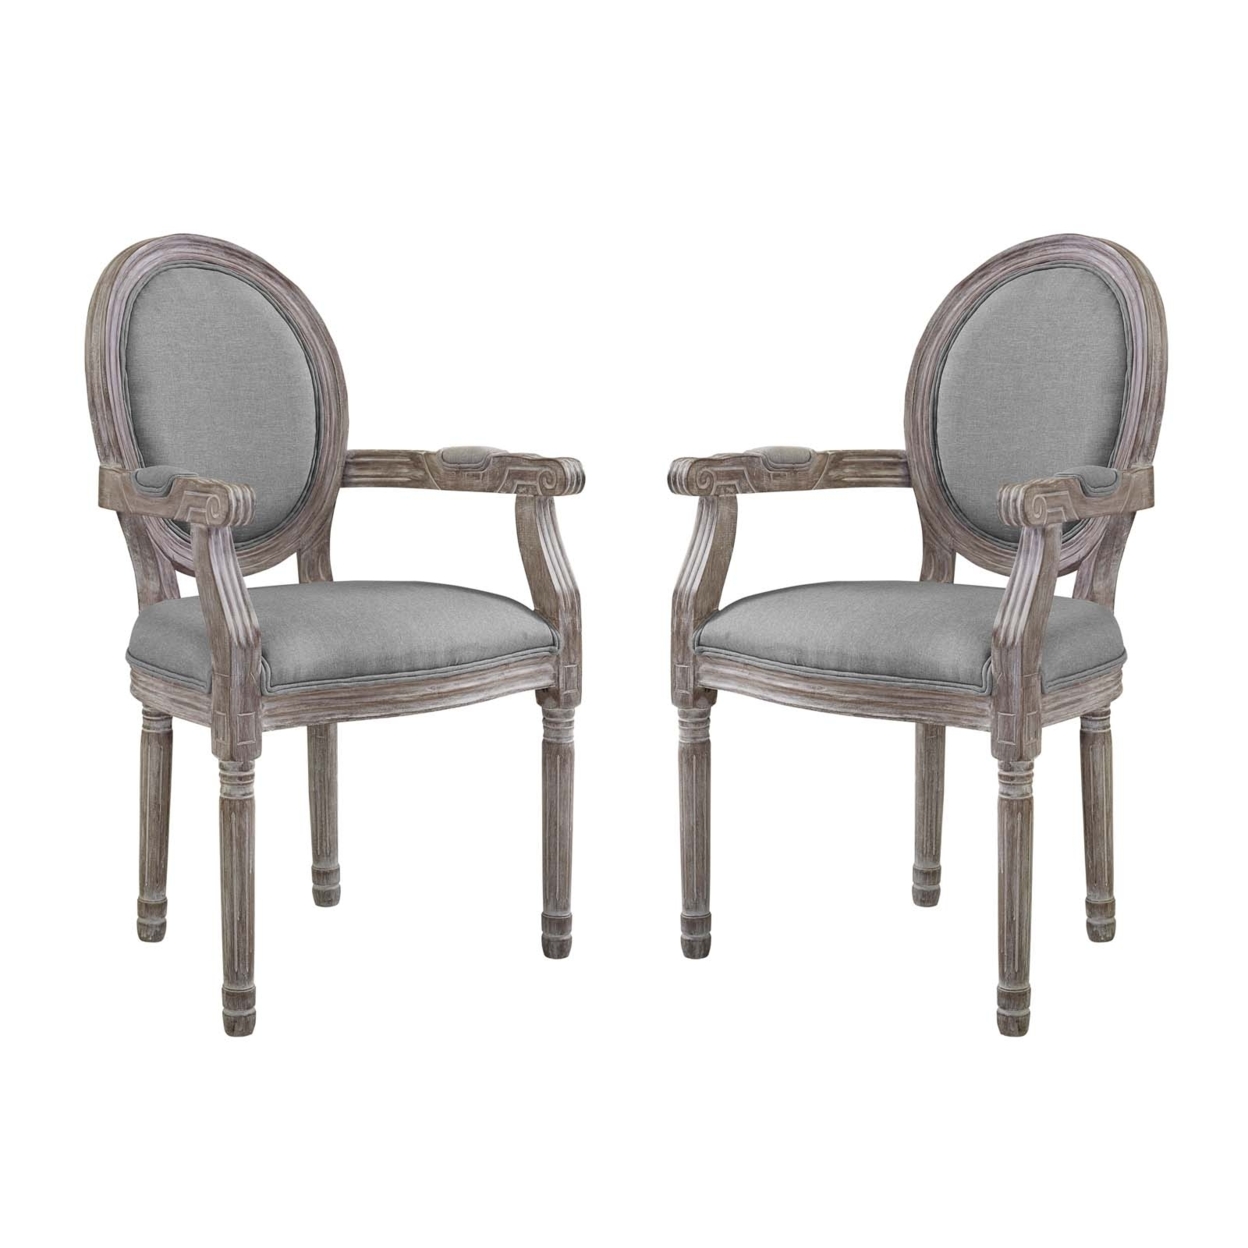 Emanate Dining Armchair Upholstered Fabric Set Of 2,Light Gray